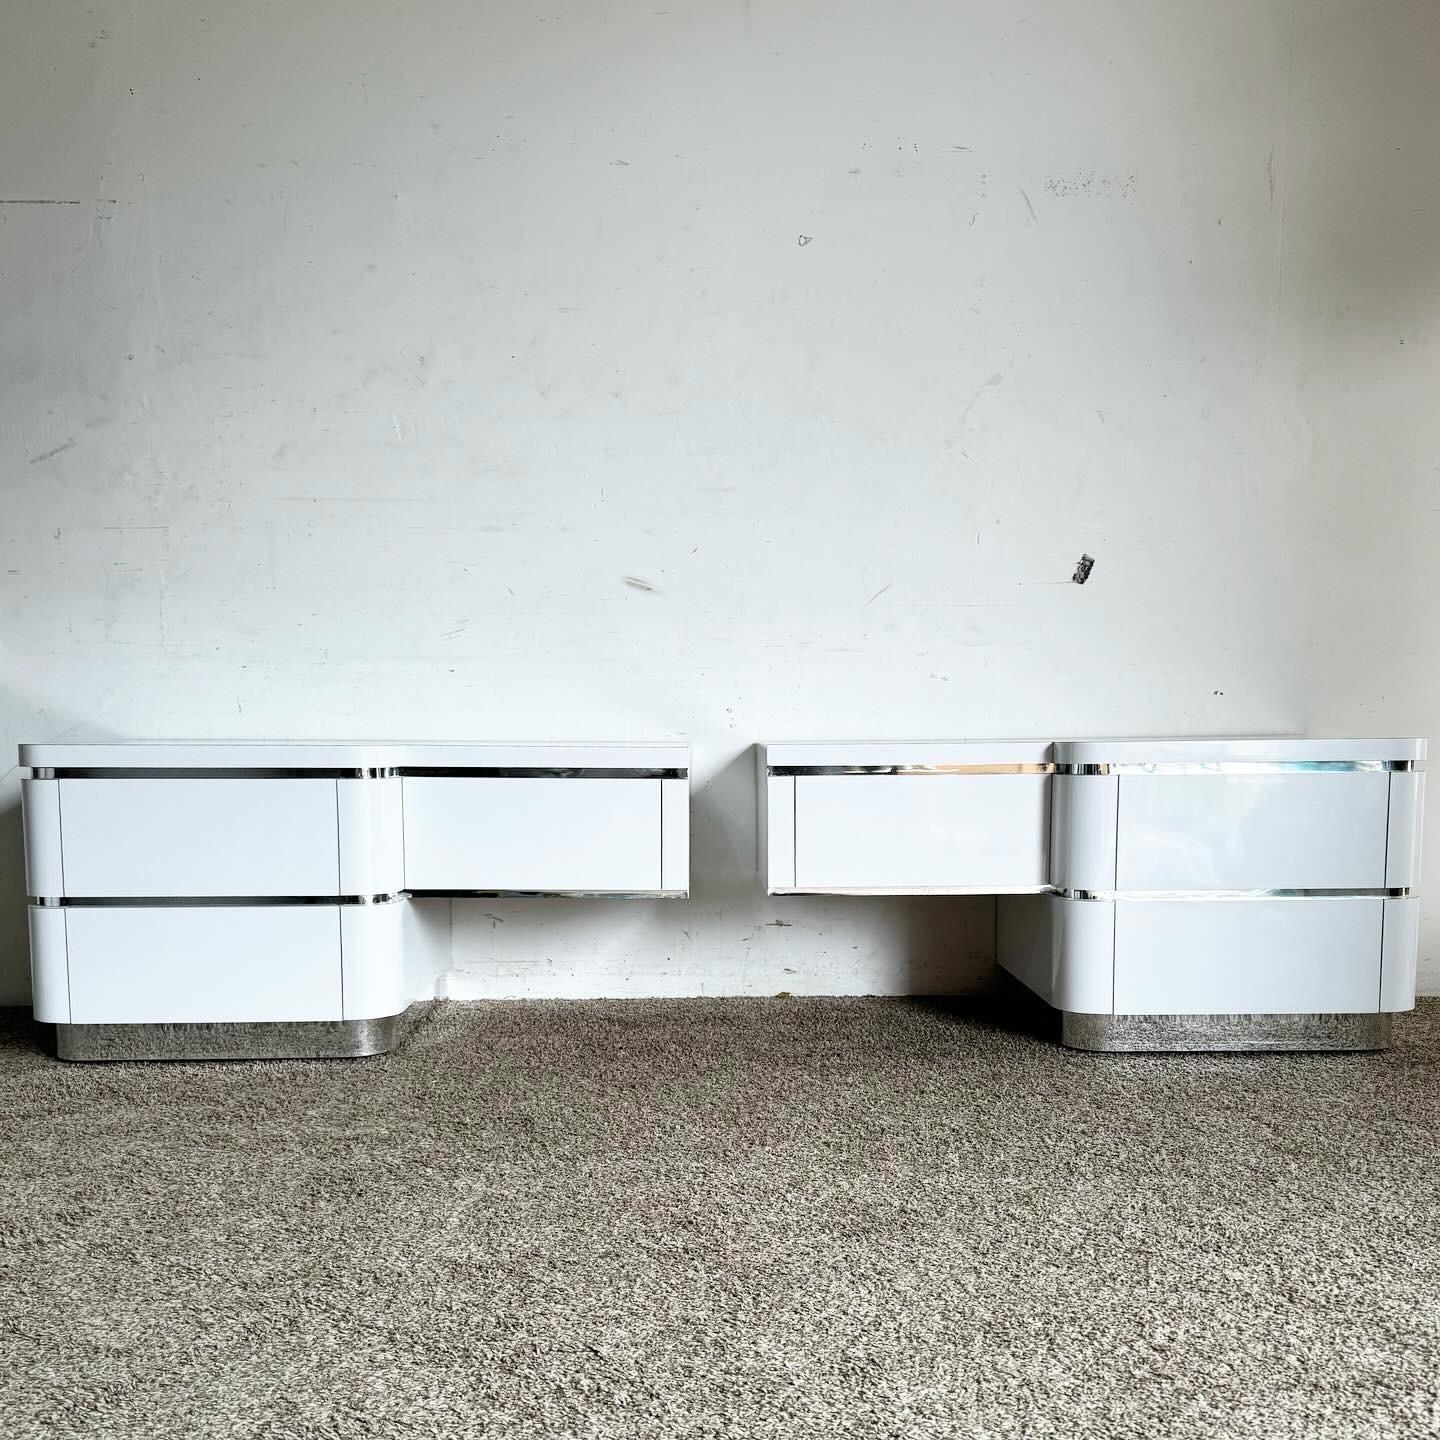 Elevate your interior with these Postmodern Oversized White Lacquer Laminate and Chrome Nightstands/Dressers. Offering versatility and modern style, these multifunctional pieces feature a minimalist white lacquer finish with chrome accents. Ideal as